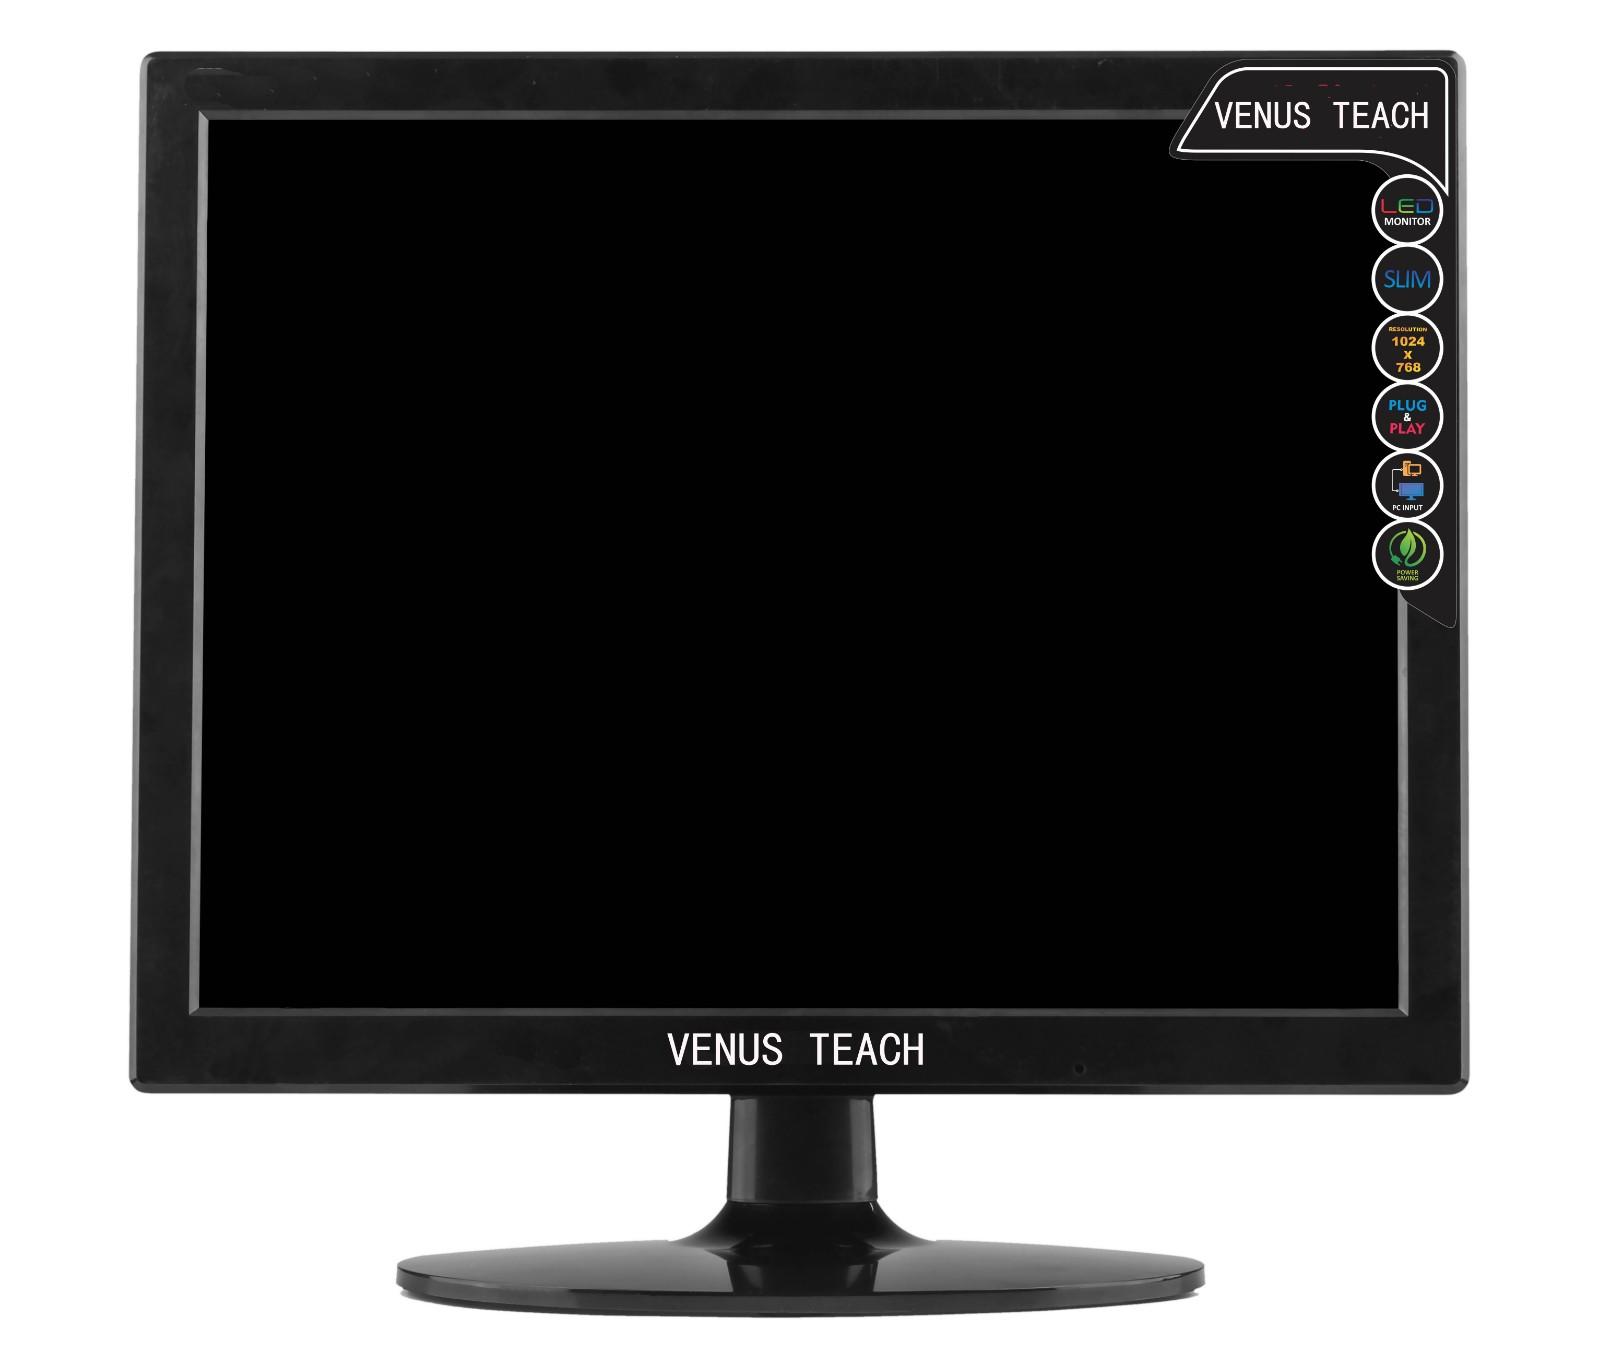 Xinyao LCD high quality 15 inch lcd monitor with hdmi output for lcd screen-3